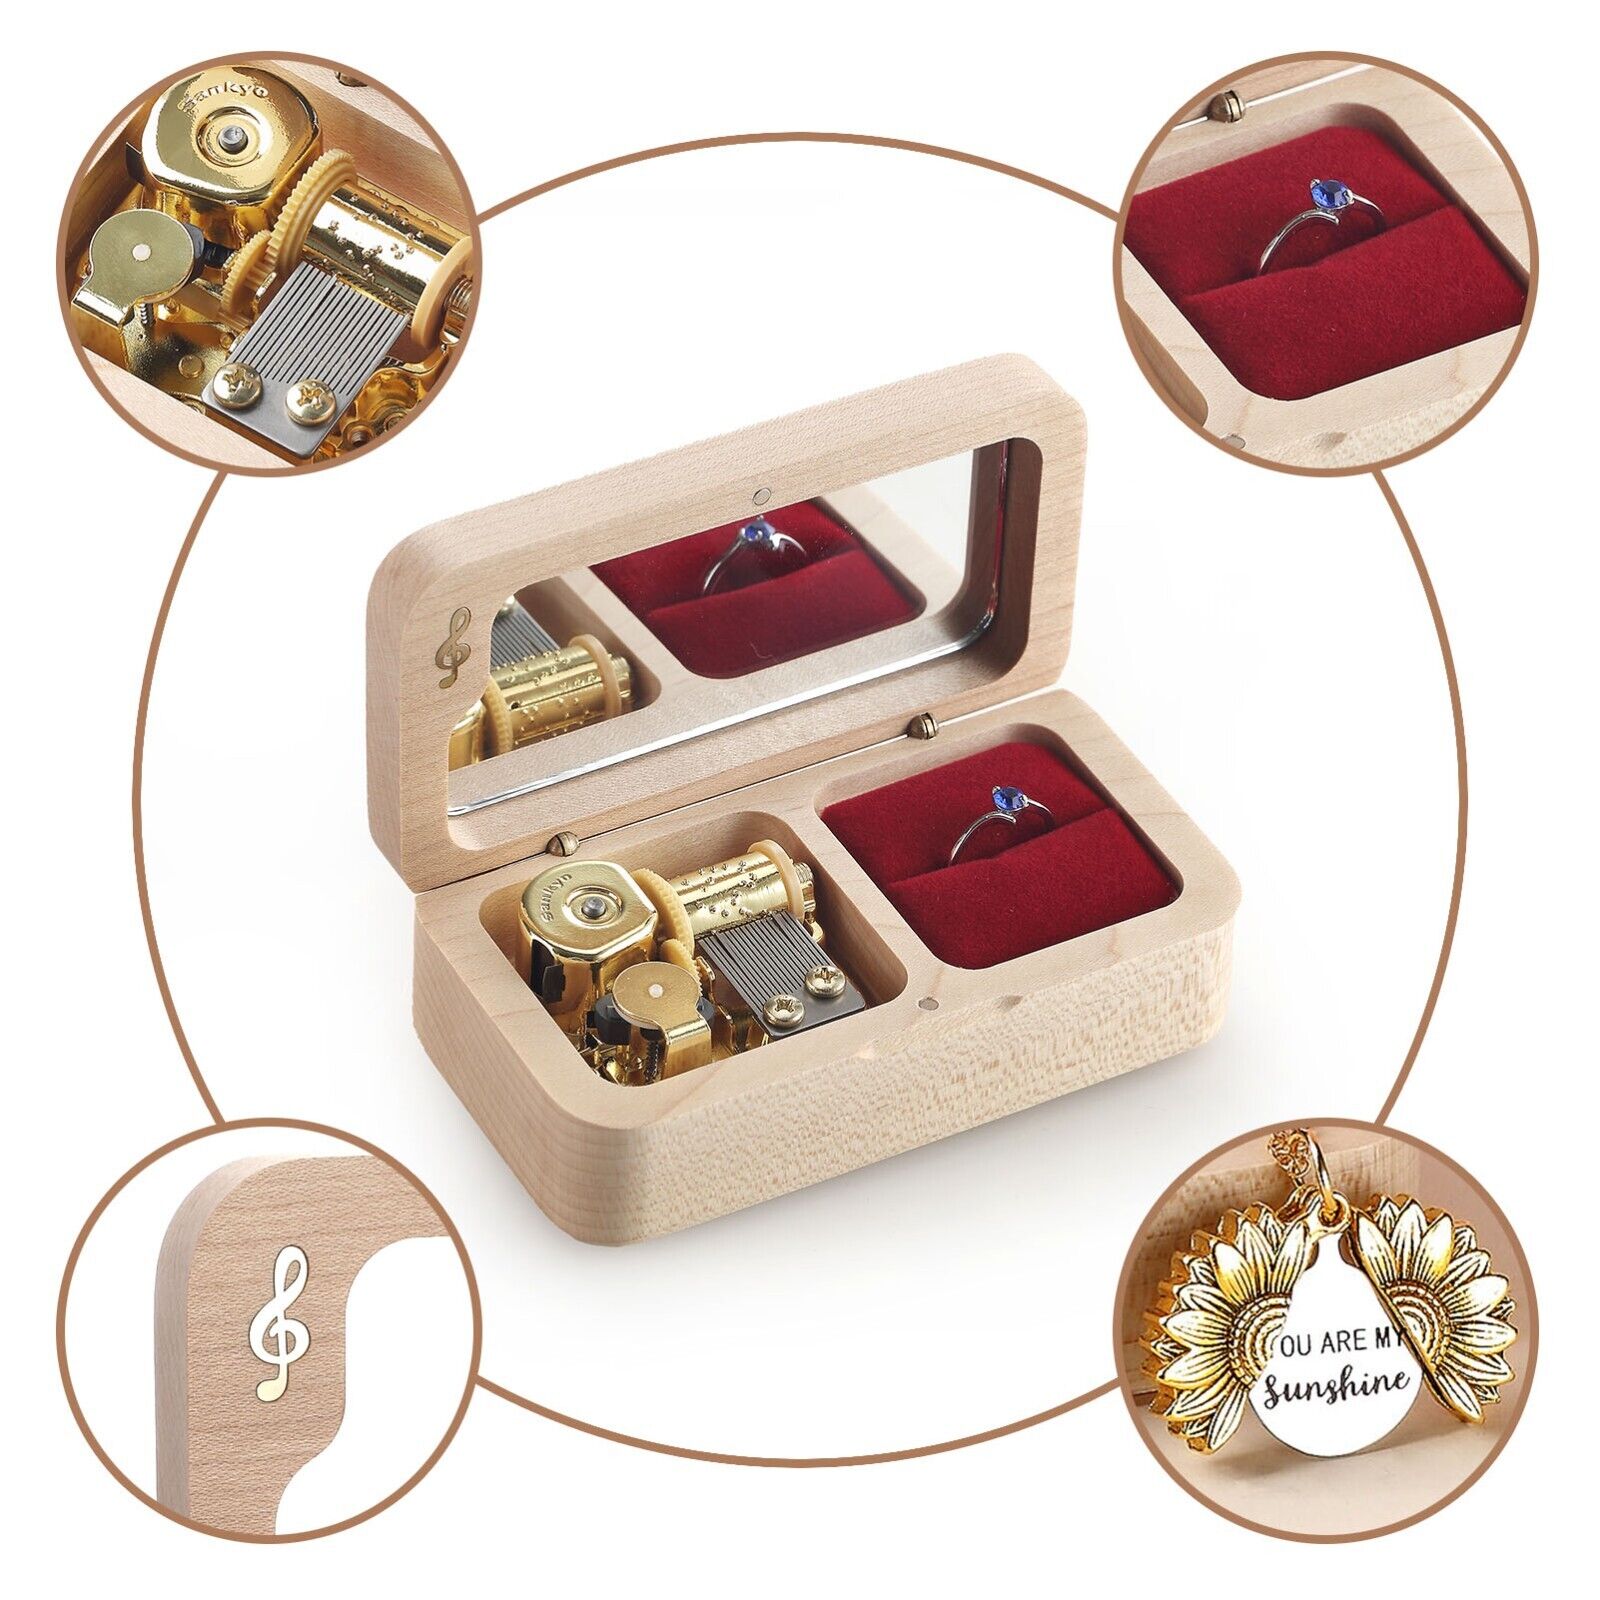 BEECH WOOD  RING JEWELRY WIND UP MUSIC BOX : ♫  CLAIR DE LUNE DEBUSSY    ♫